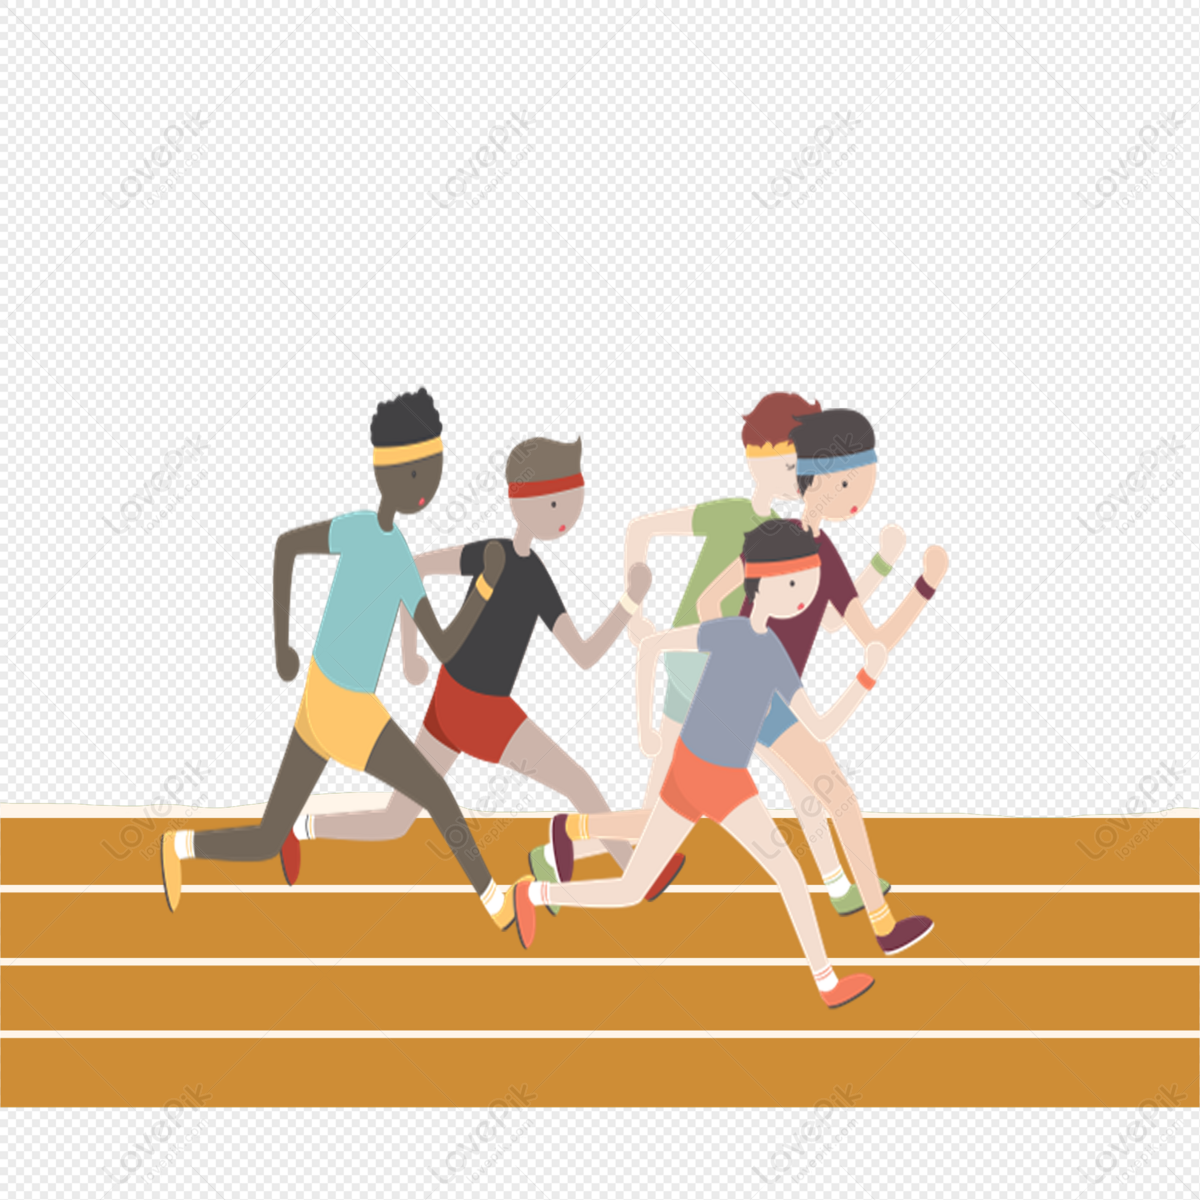 Track And Field Competition PNG Transparent And Clipart Image For Free  Download - Lovepik | 401385826